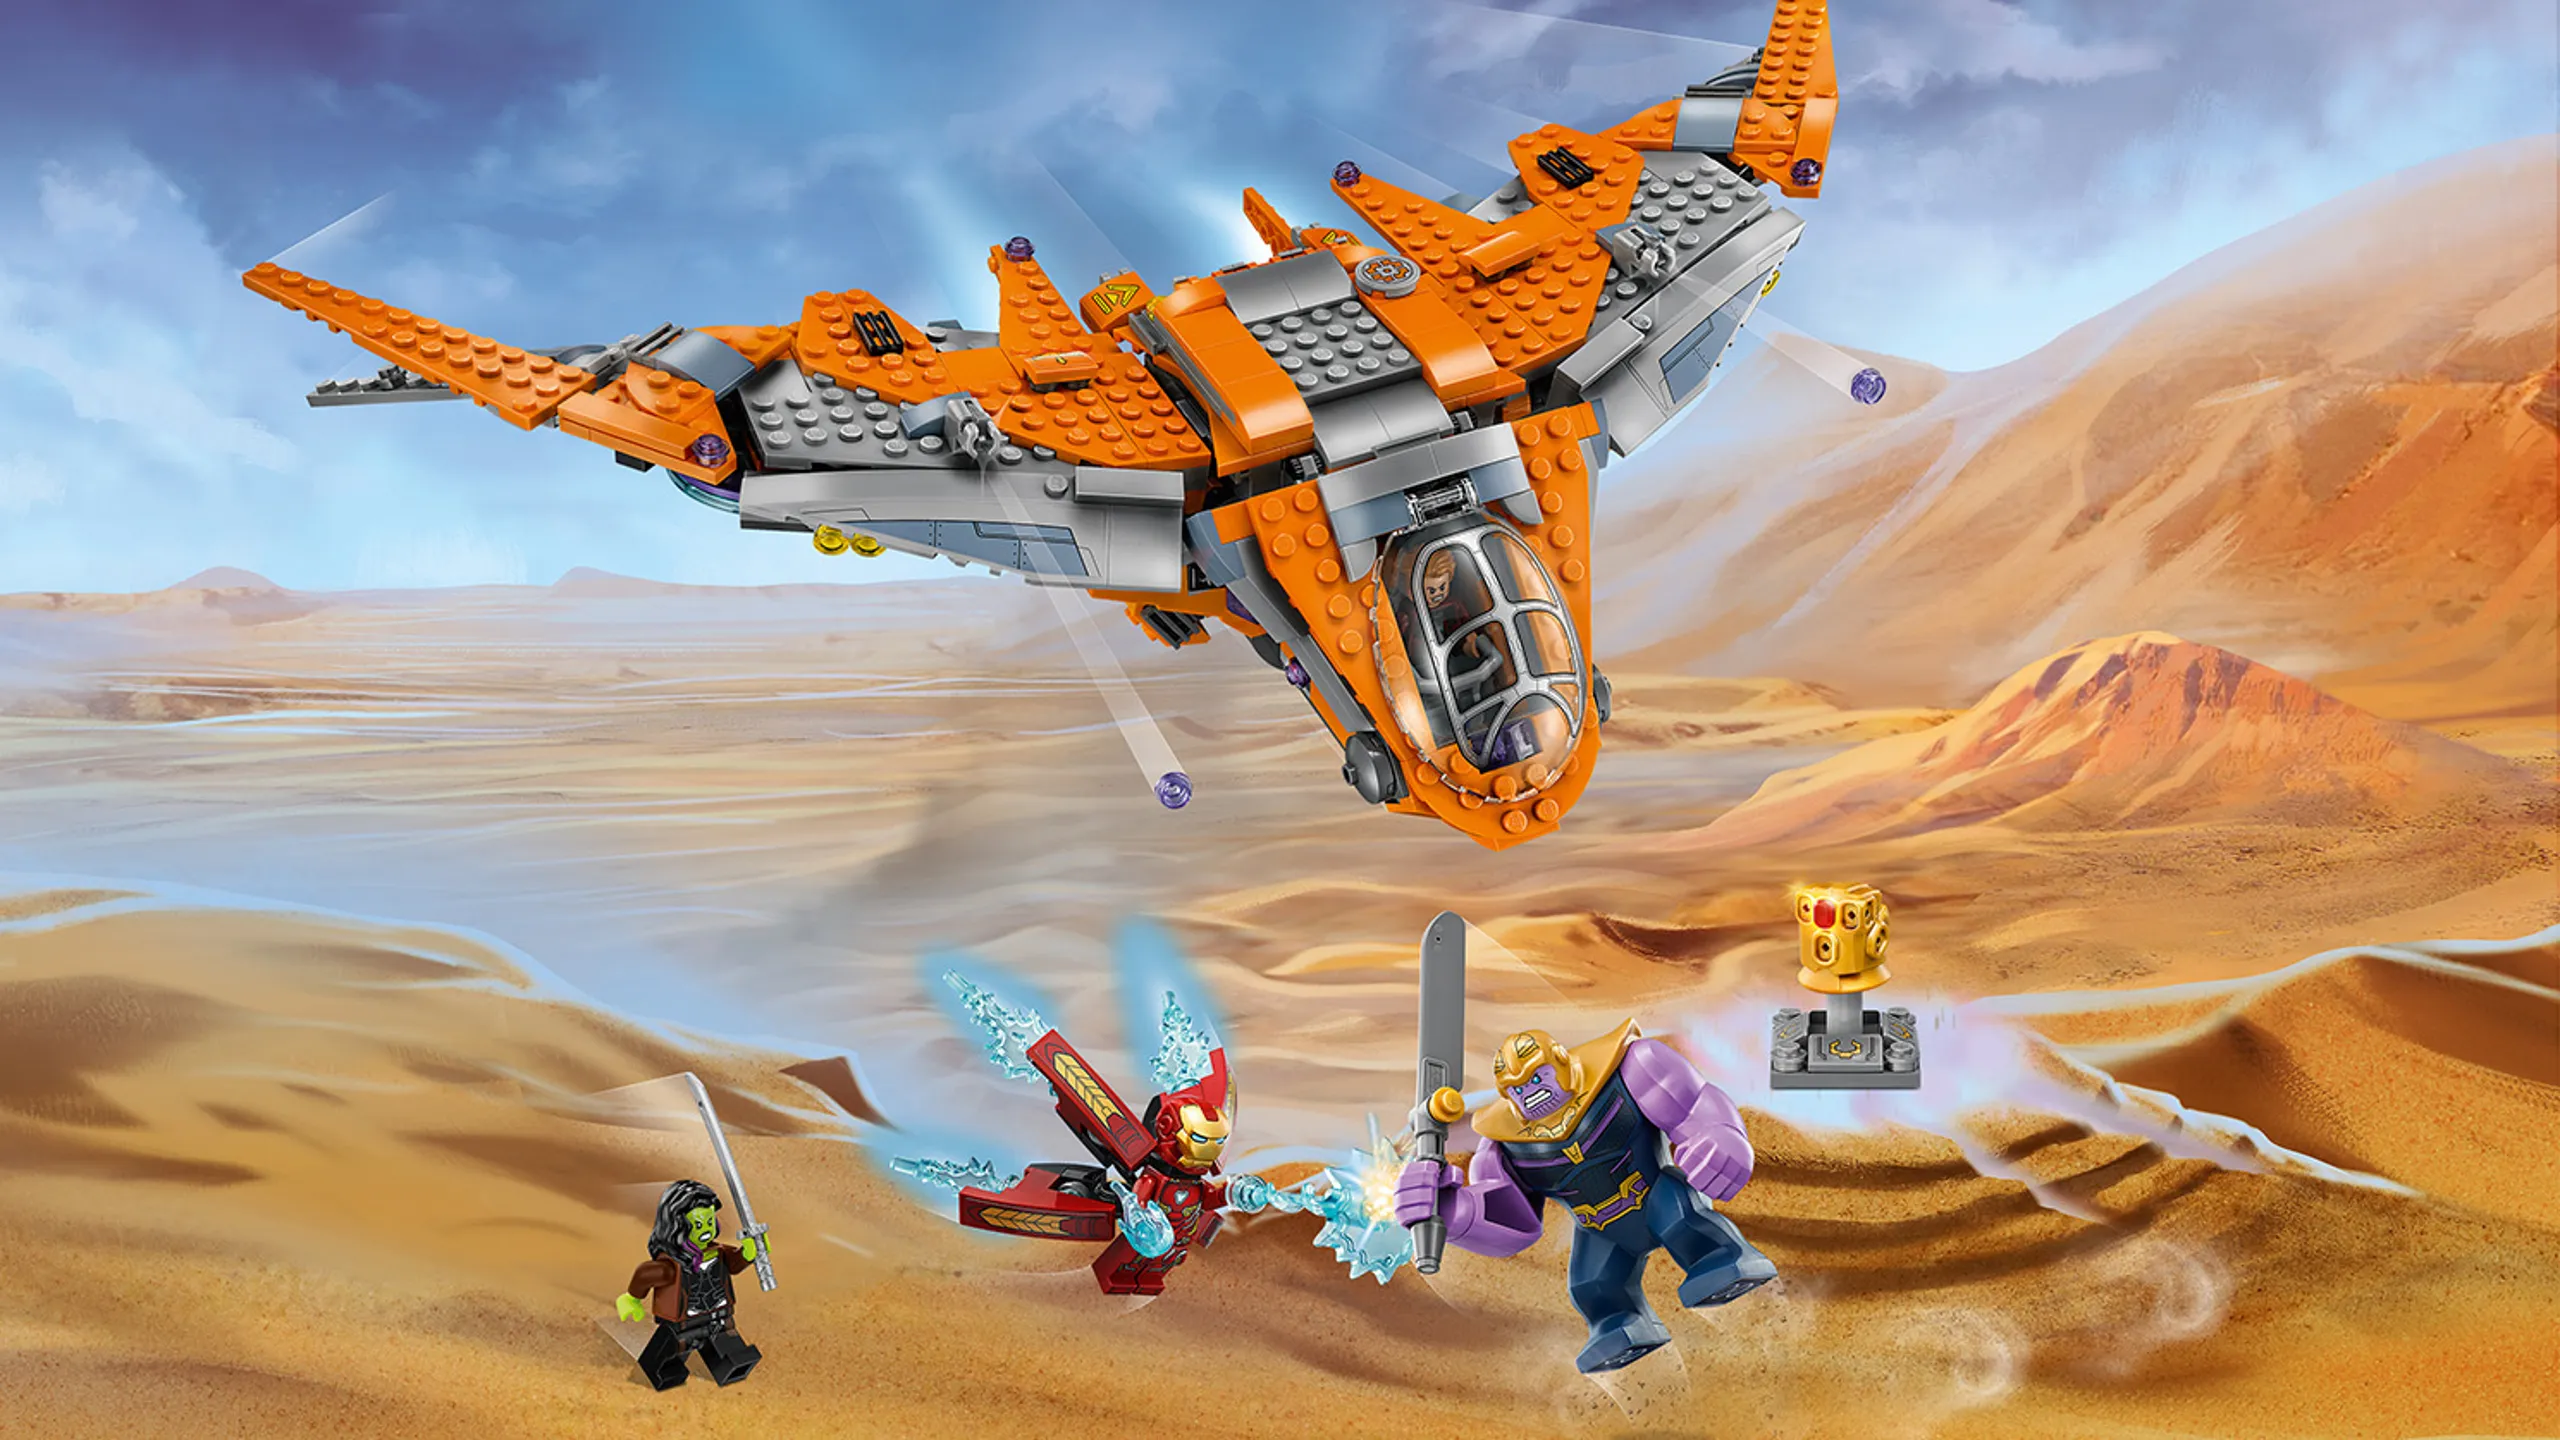 LEGO Super Heroes - 76107 Thanos: Ultimate Battle - Fire The Guardians’ Ship’s stud shooters at Thanos. Open the cockpit and drive into attack on the space scooter with Star-Lord and Gamora. 